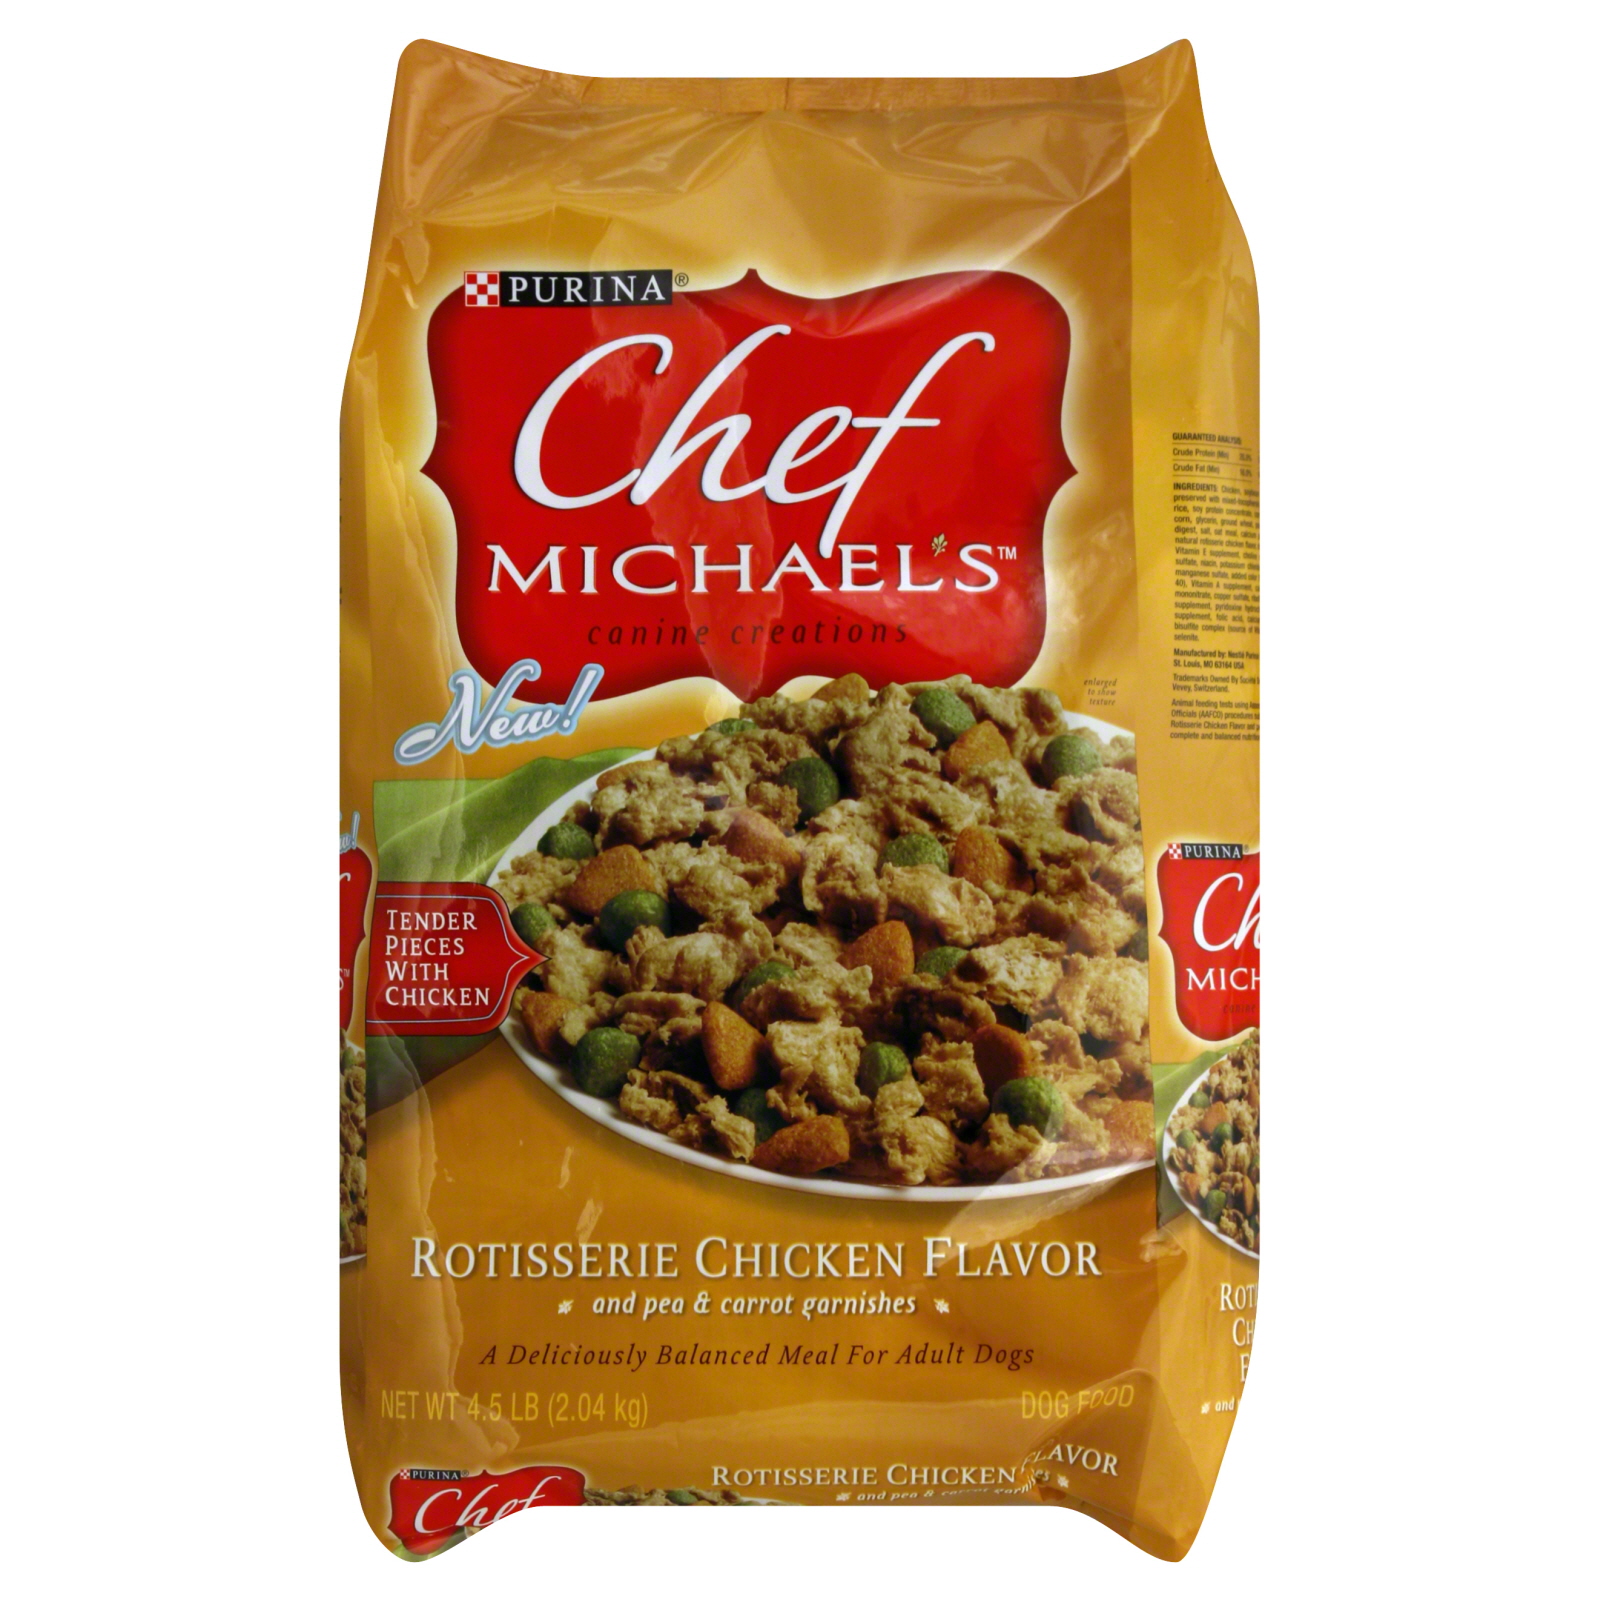 Purina Chef Michael's Canine Creations Dog Food, Rotisserie Chicken Flavor, 4.5 lb (2.04 kg)